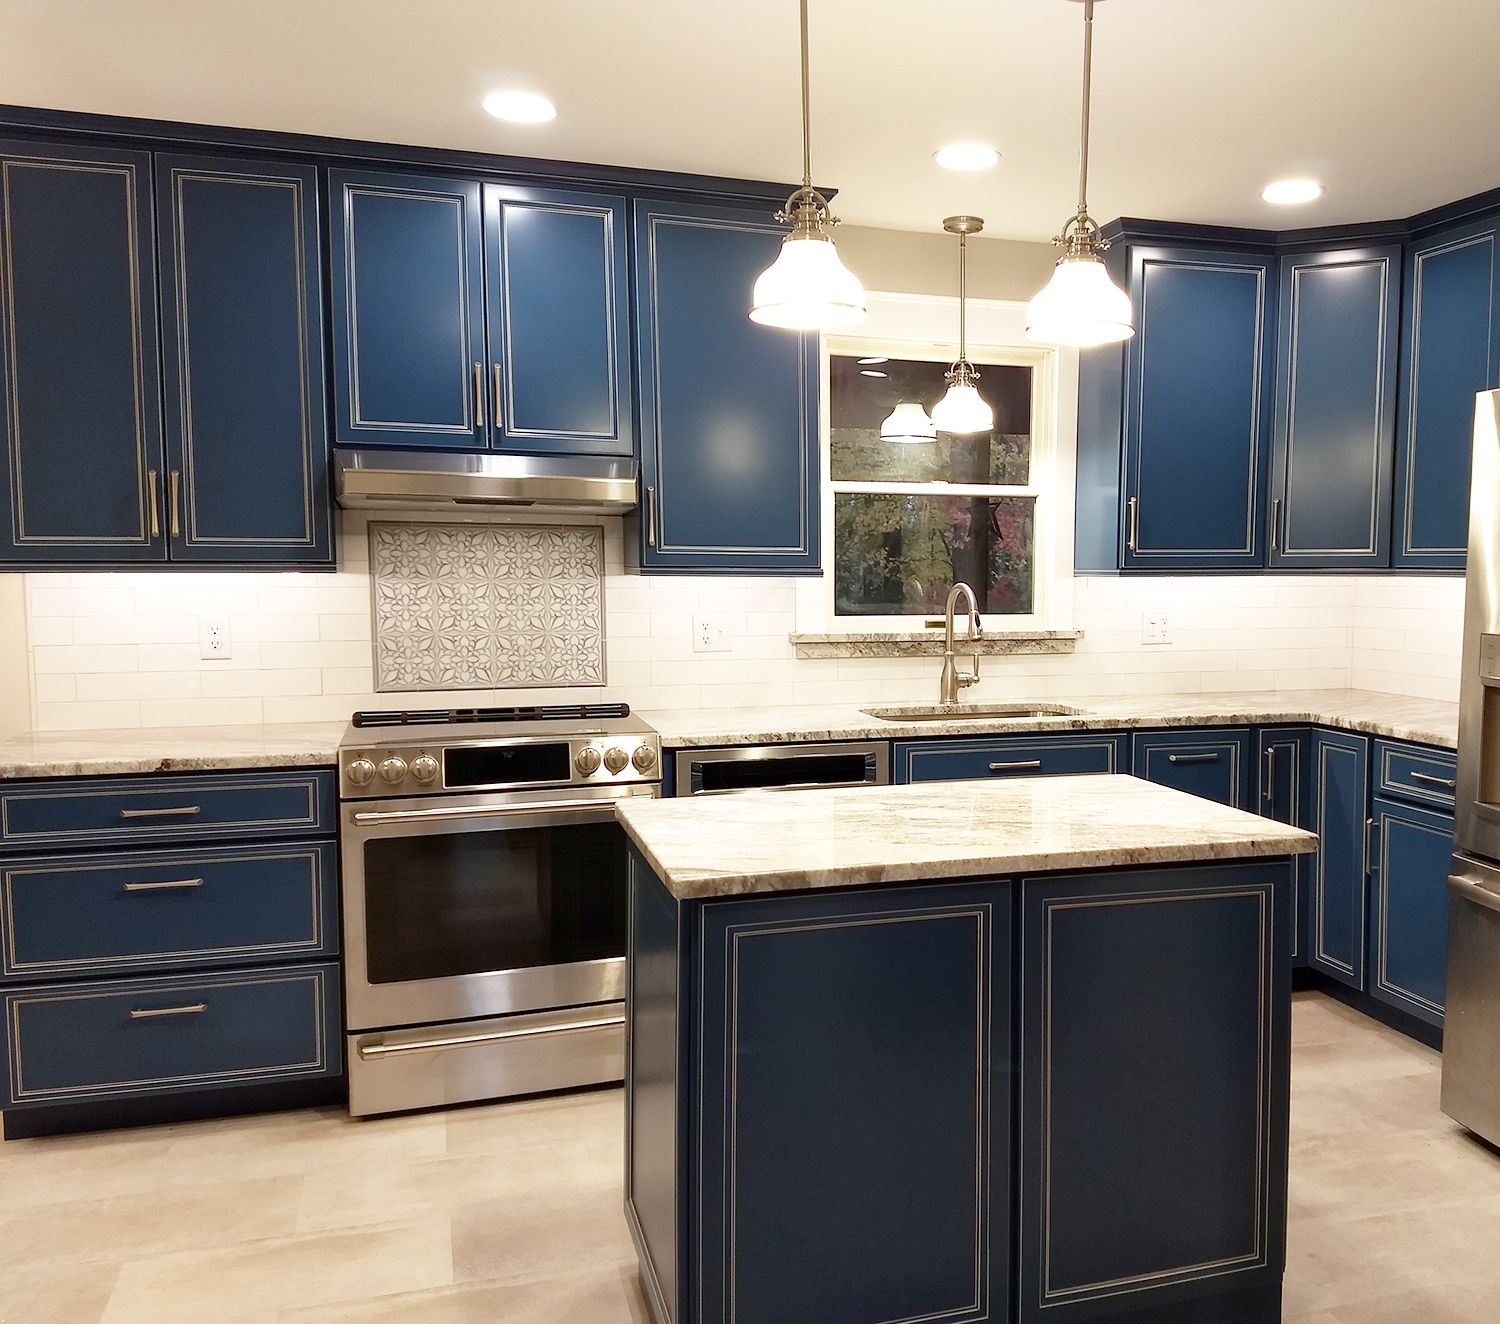 Home remodeling project featuring a kitchen with custom maple cabinetry painted blue, granite countertops, ceramic & marble backsplash, stainless / satin nickel accessories, and a hidden microwave